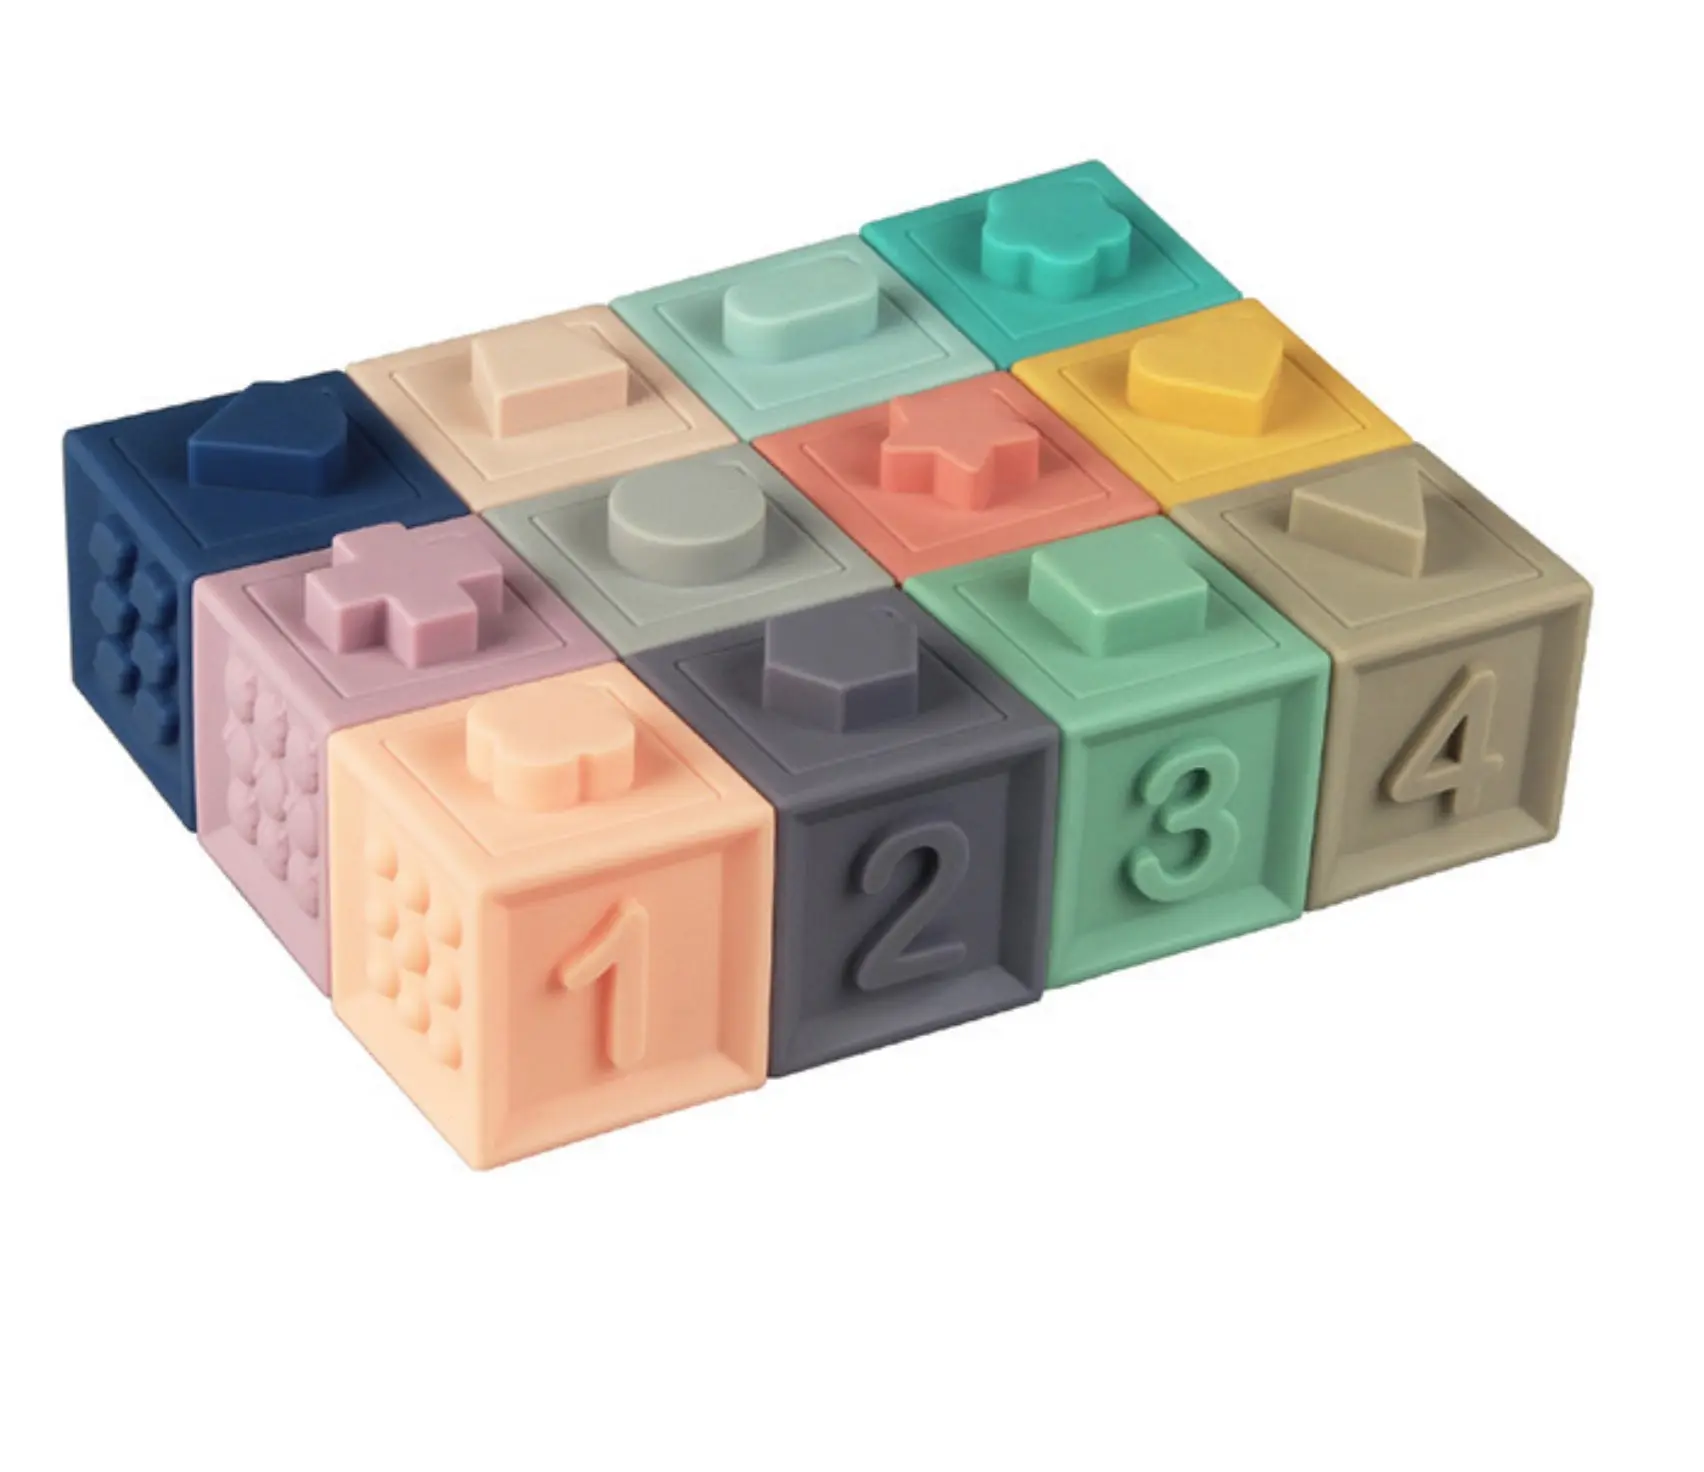 BPA Free facile da pulire Soft Stacking Play Block Squeezable Educational Building Block Bricks For Baby